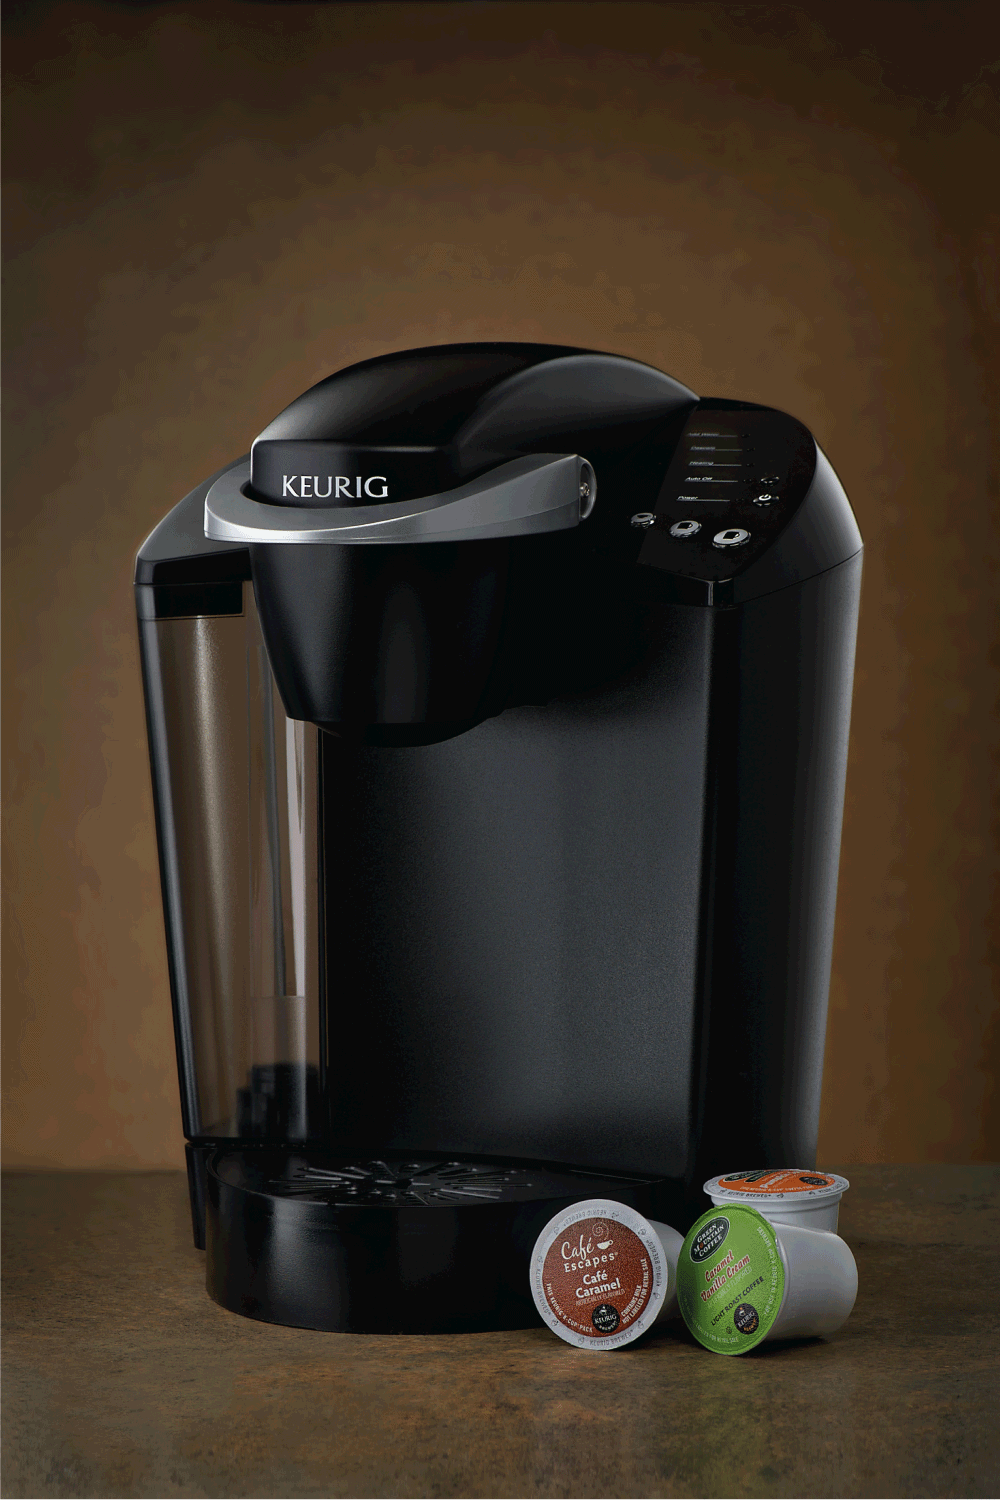 Keurig k-cup coffee maker with three k-cup pods